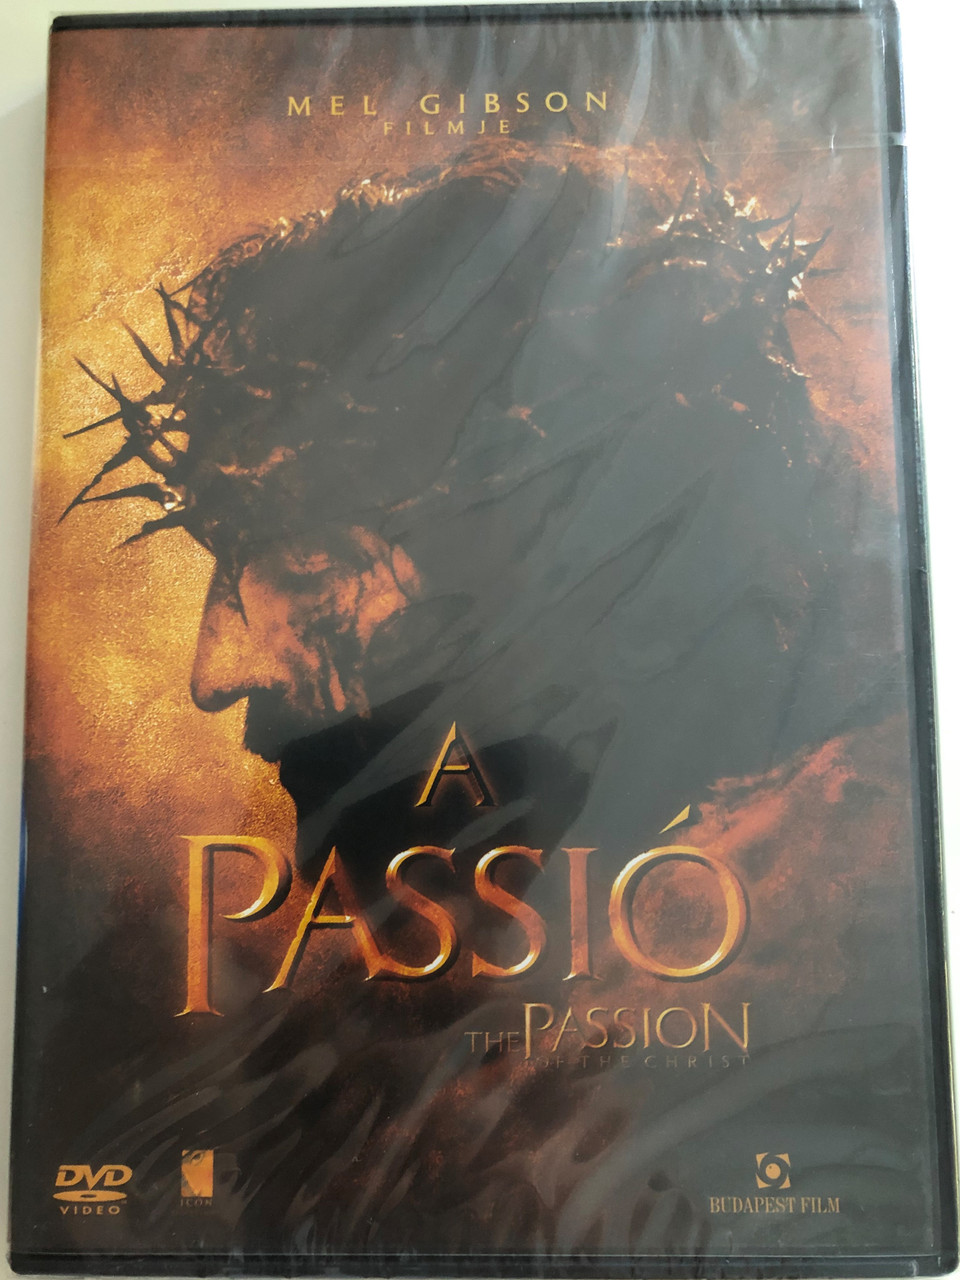 The Passion of the Christ DVD A Passió / Mel Gibson filmje / Directed by  Mel Gibson / Starring: Jim Caviezel, Monica Bellucci, Maia Morgenstern,  Sergio Rubini - Bible in My Language